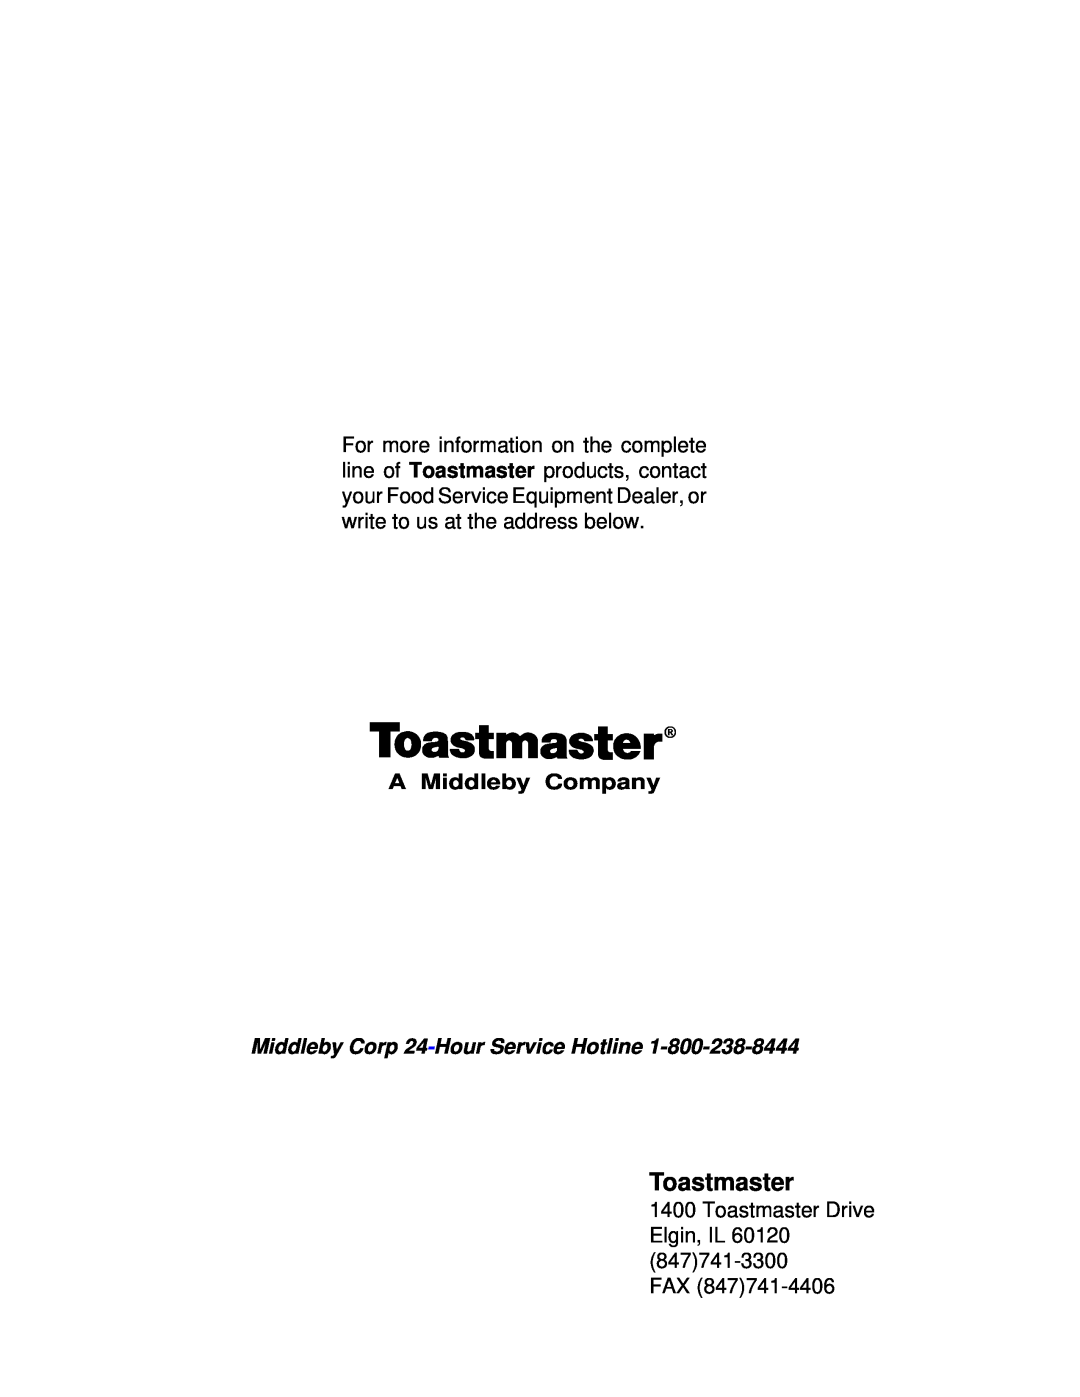 Toastmaster AM36SS A Middleby Company, Toastmaster Drive Elgin, IL 60120 FAX, Middleby Corp 24-Hour Service Hotline 